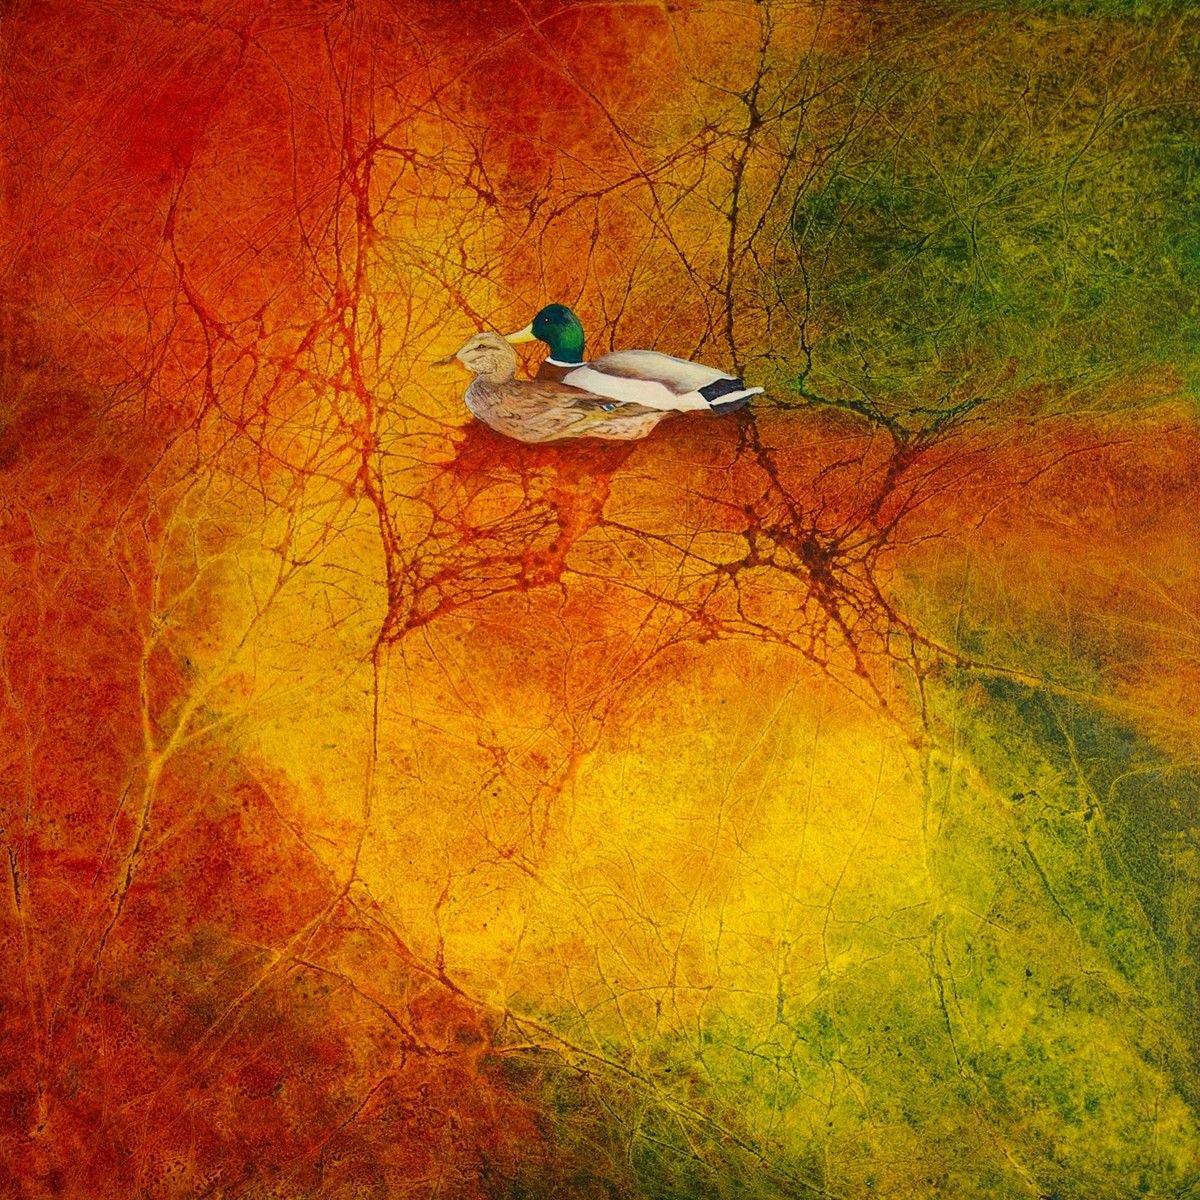 Mallard Ducks, a realistic bird painting with abstract lake reflections by oconnart